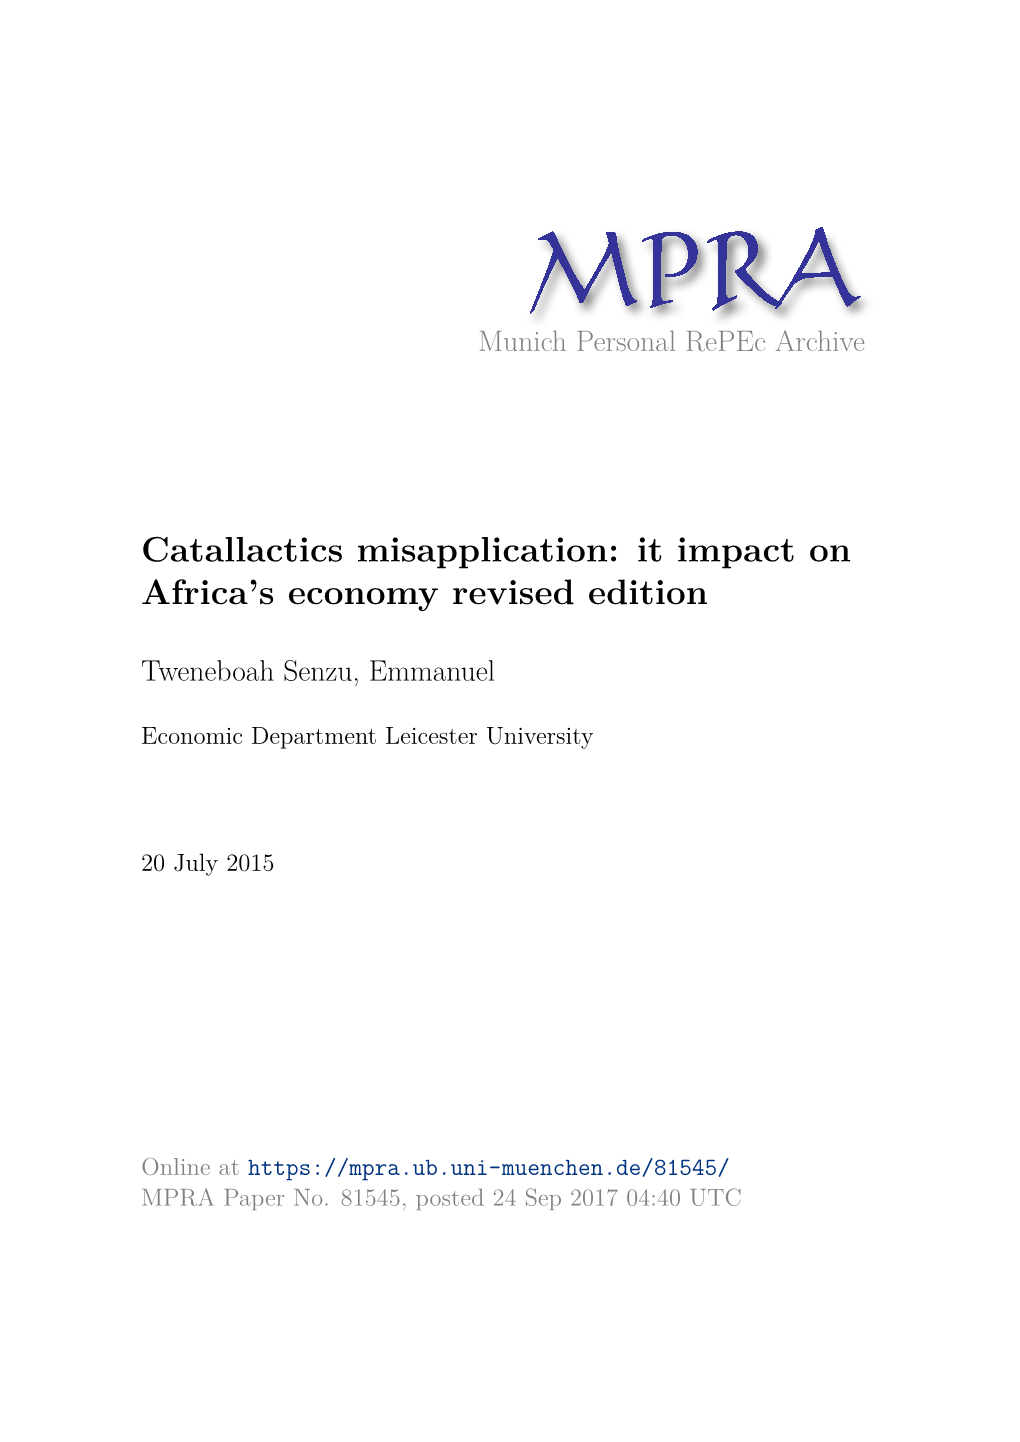 Catallactics Misapplication: It Impact on Africa’S Economy Revised Edition